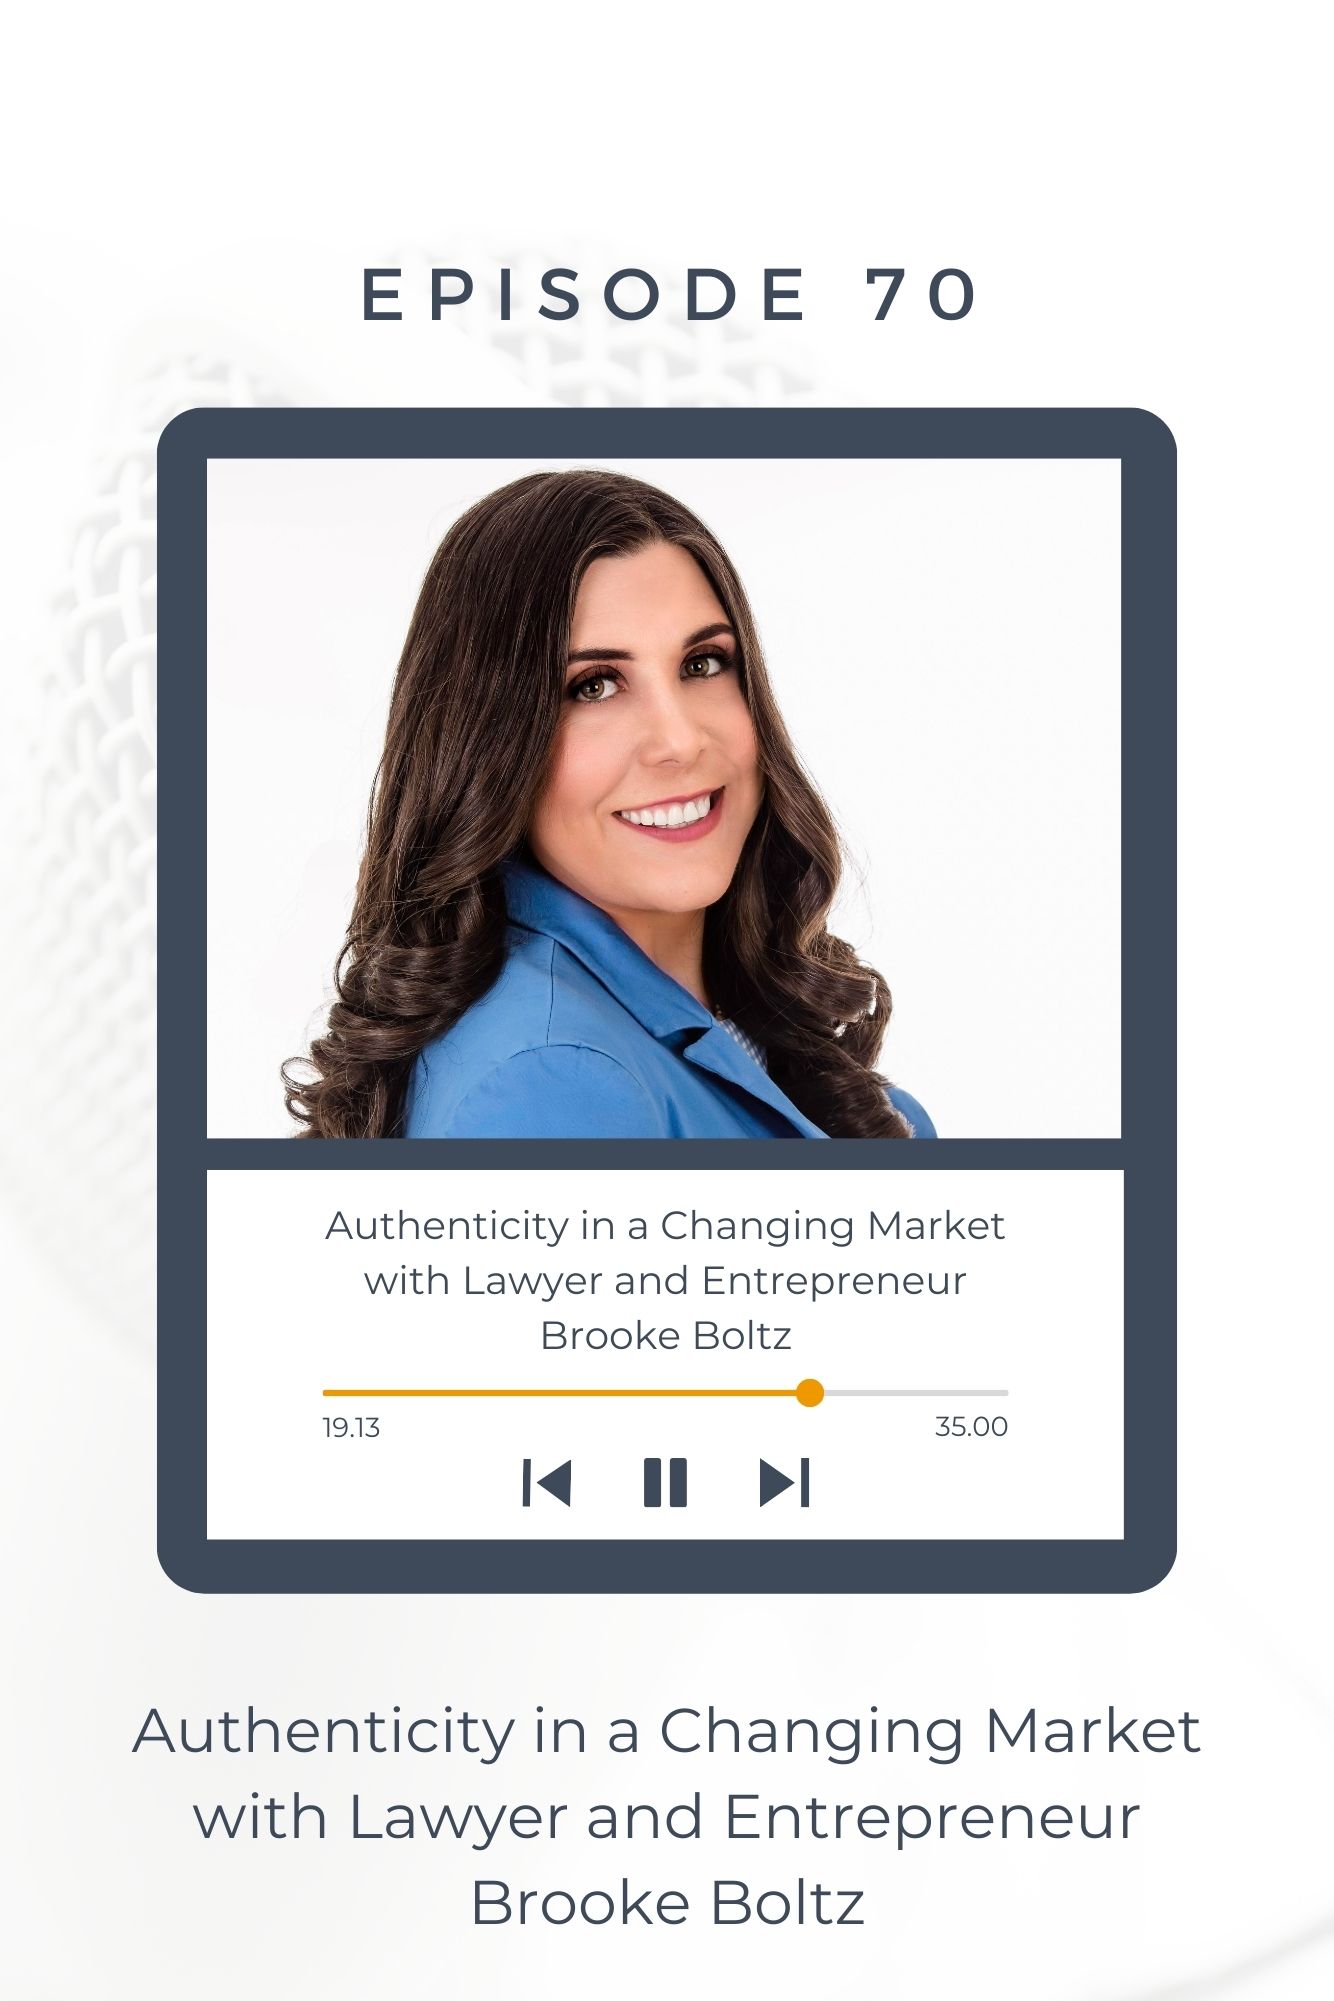 A picture of Brooke Boltz a woman lawyer and entrepreneur is a guest on the Christian business breakdown, a podcast for Christian women who are in business and discusses how to find authenticity in a changing market which is important for Christian women business owners.